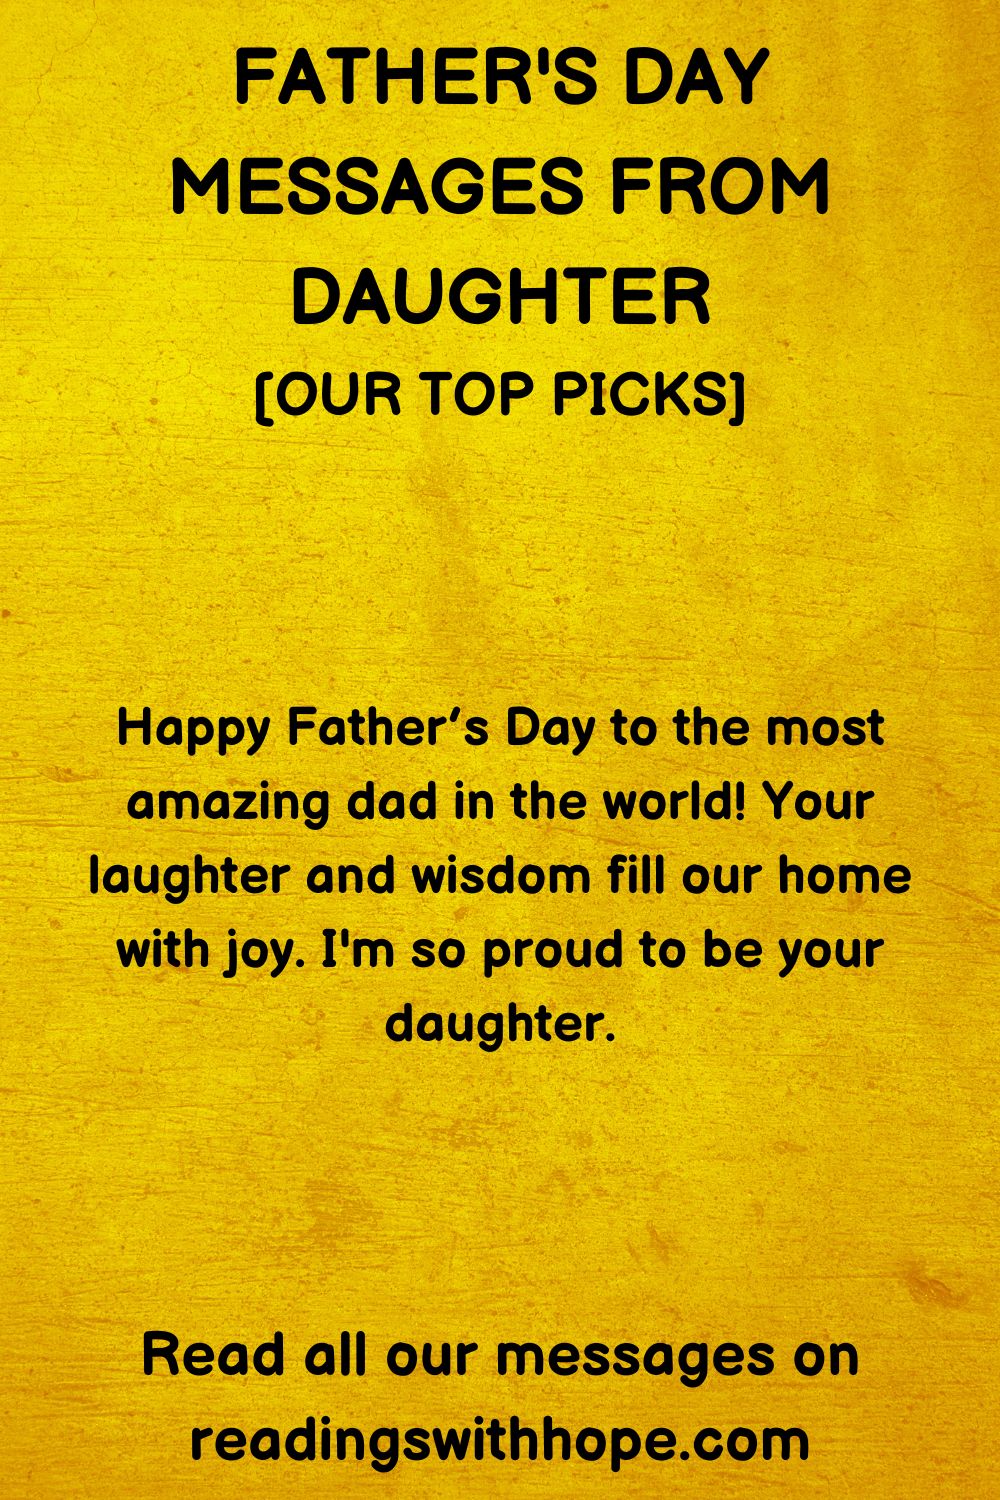 49 Father's Day Messages From Daughter